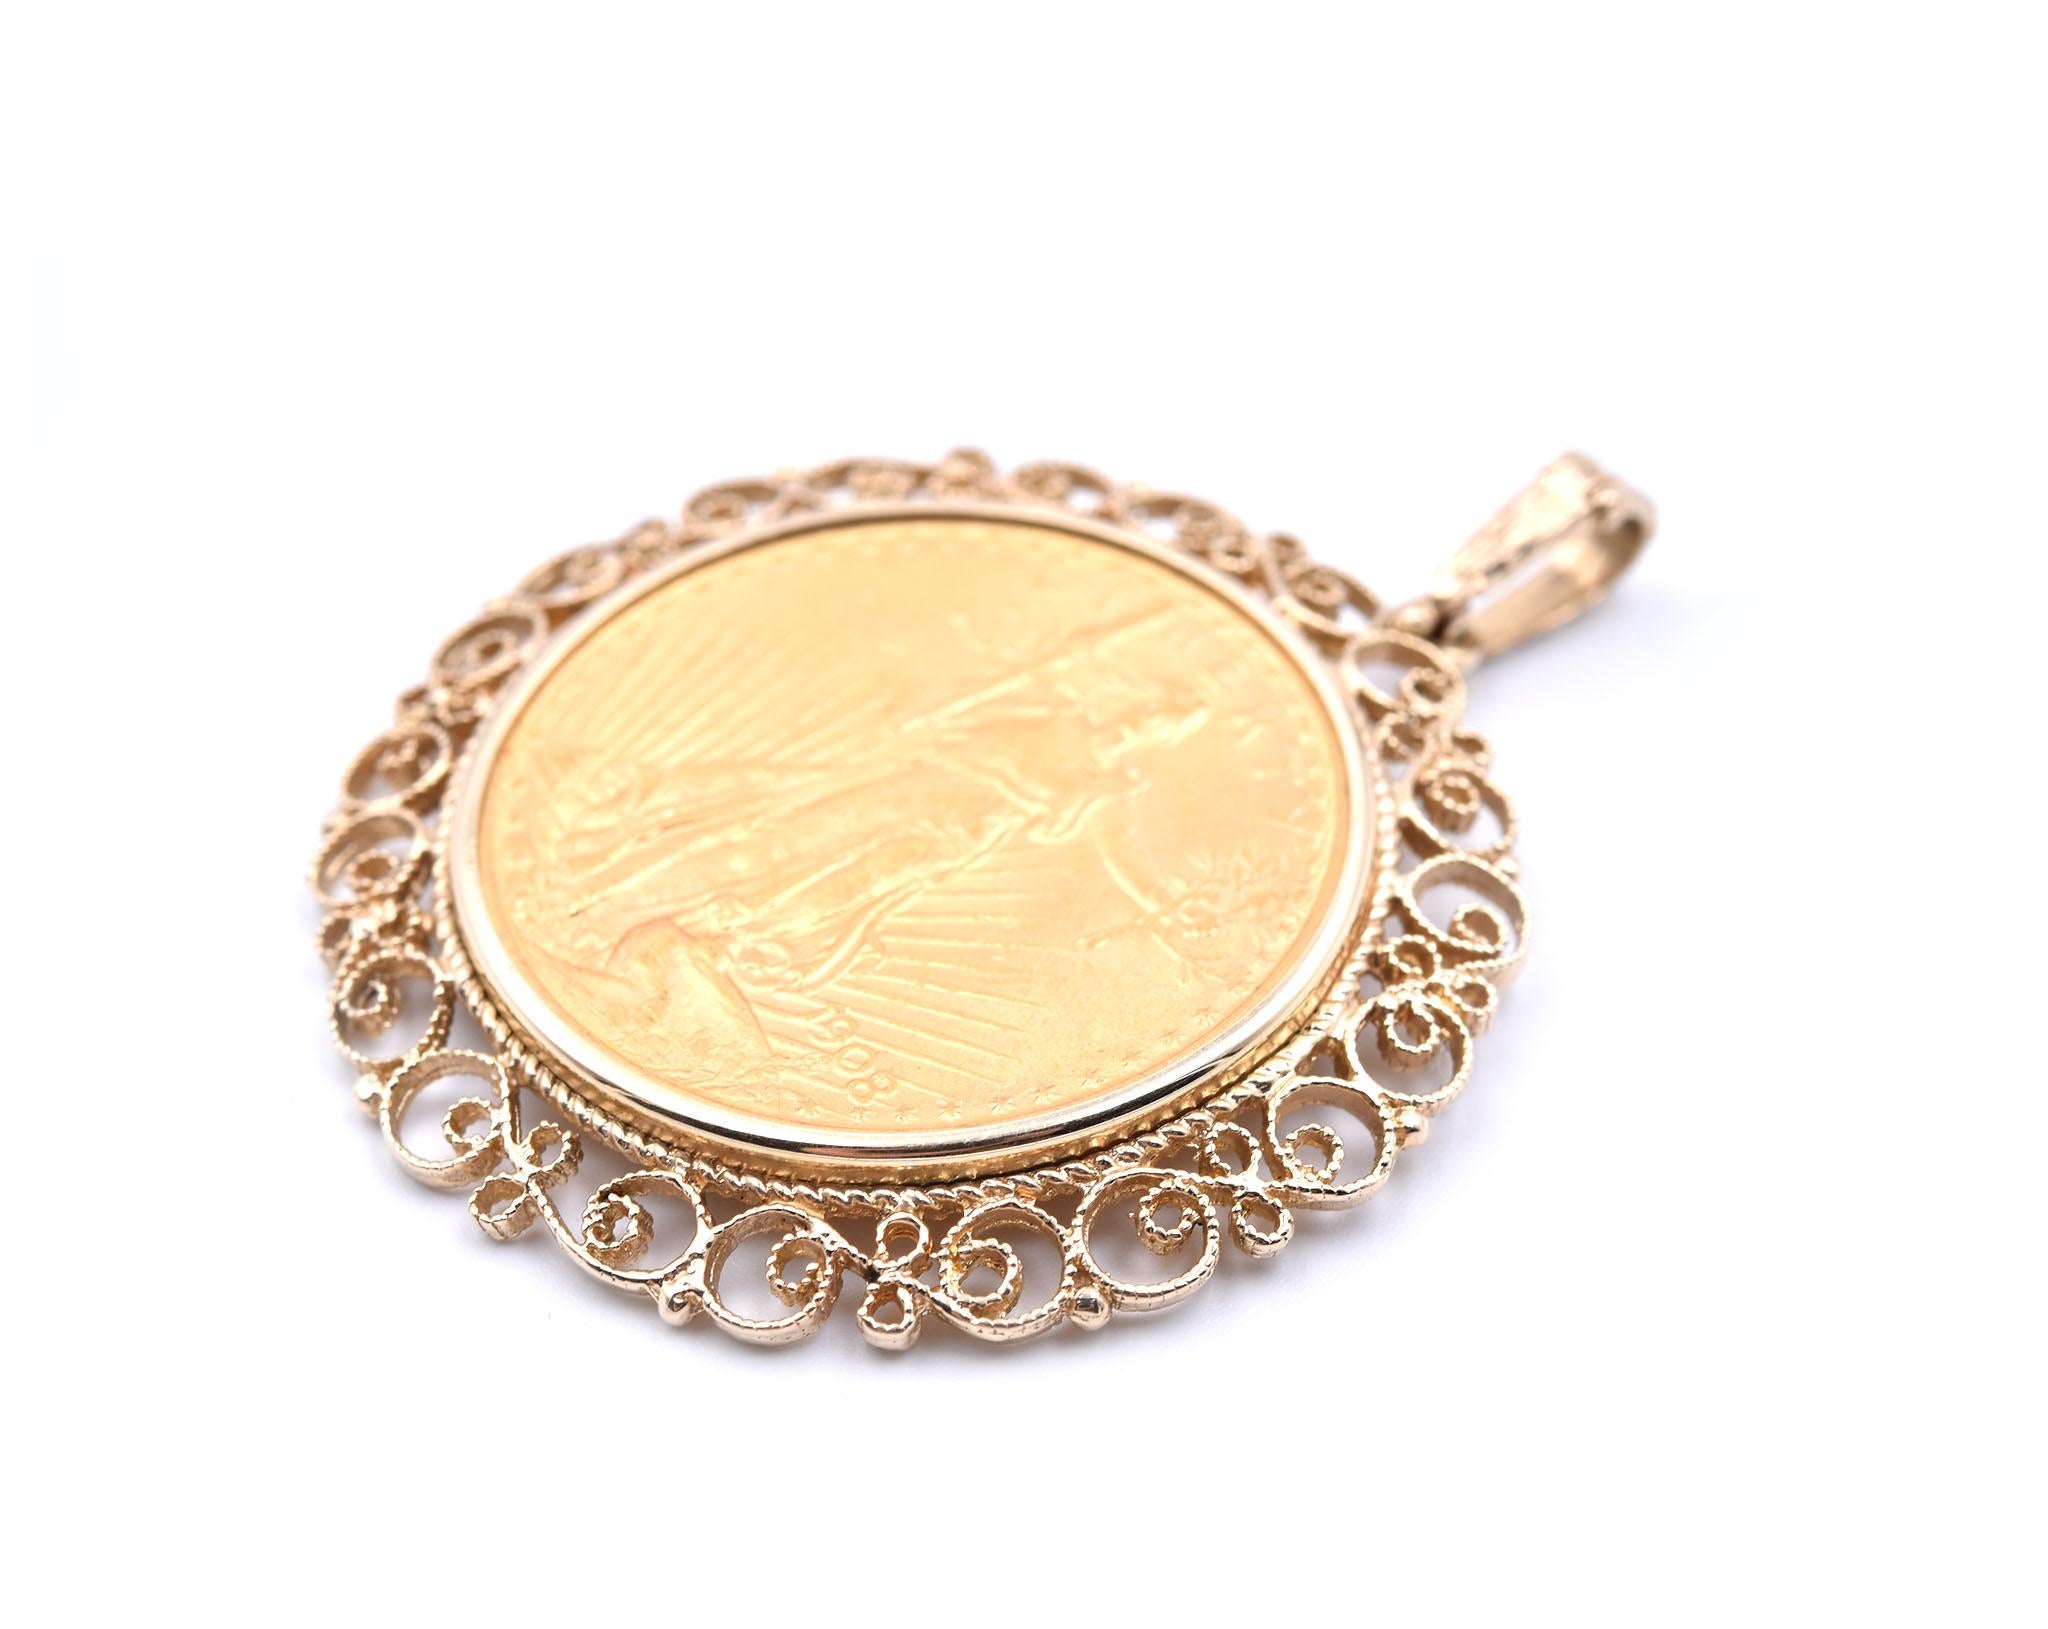 Designer: custom design
Material: 14k yellow gold bezel pendant
Dimensions: pendant is 59mm long with vail and has a circumference of 46.50mm
Weight:  42.87 grams
